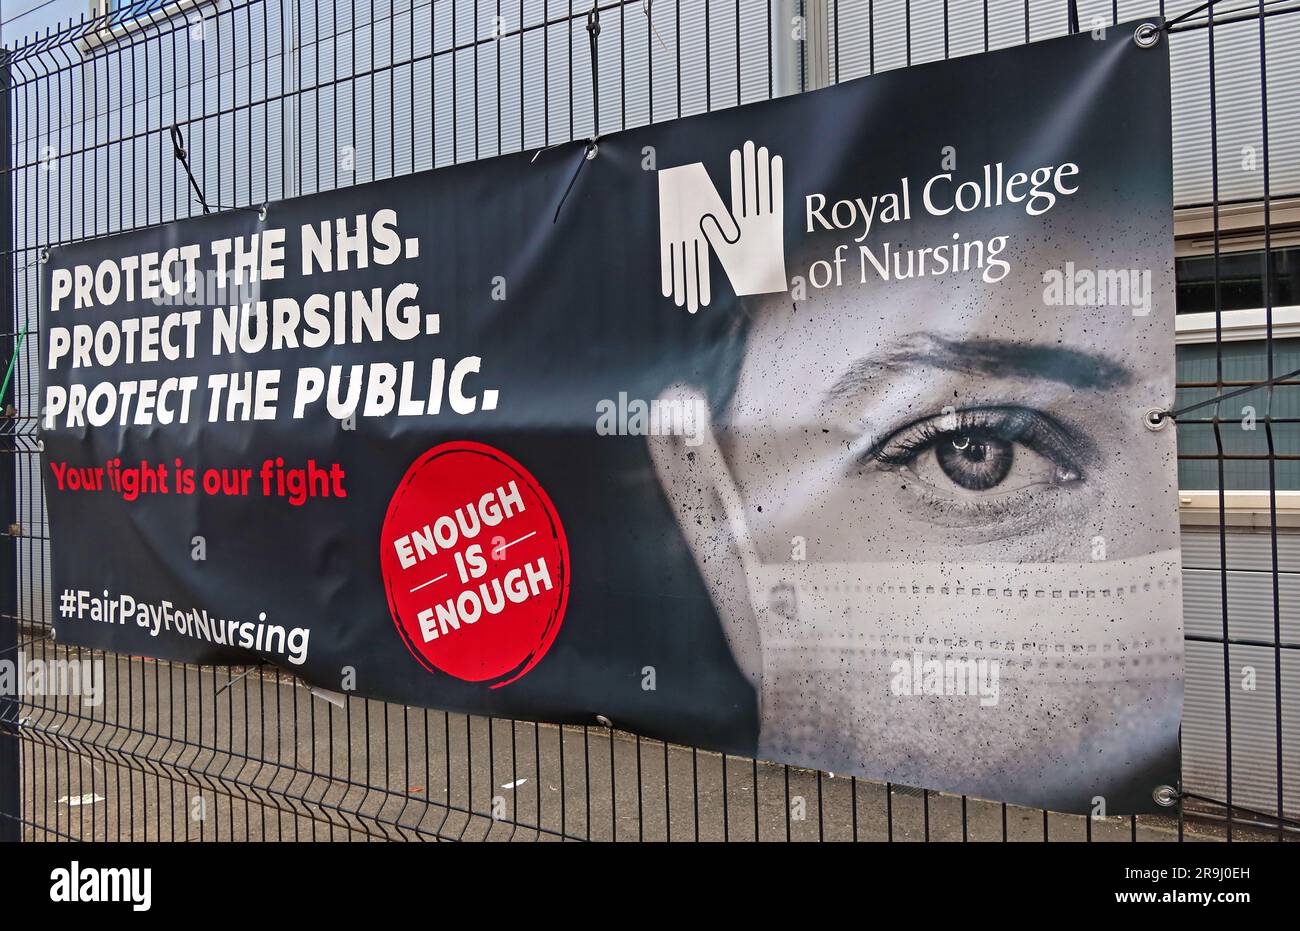 RCN banner on a fence at Mater infirmorum Belfast, Royal College of Nursing say Protect the NHS, nursing and the public, #FairPayForNursing Stock Photo